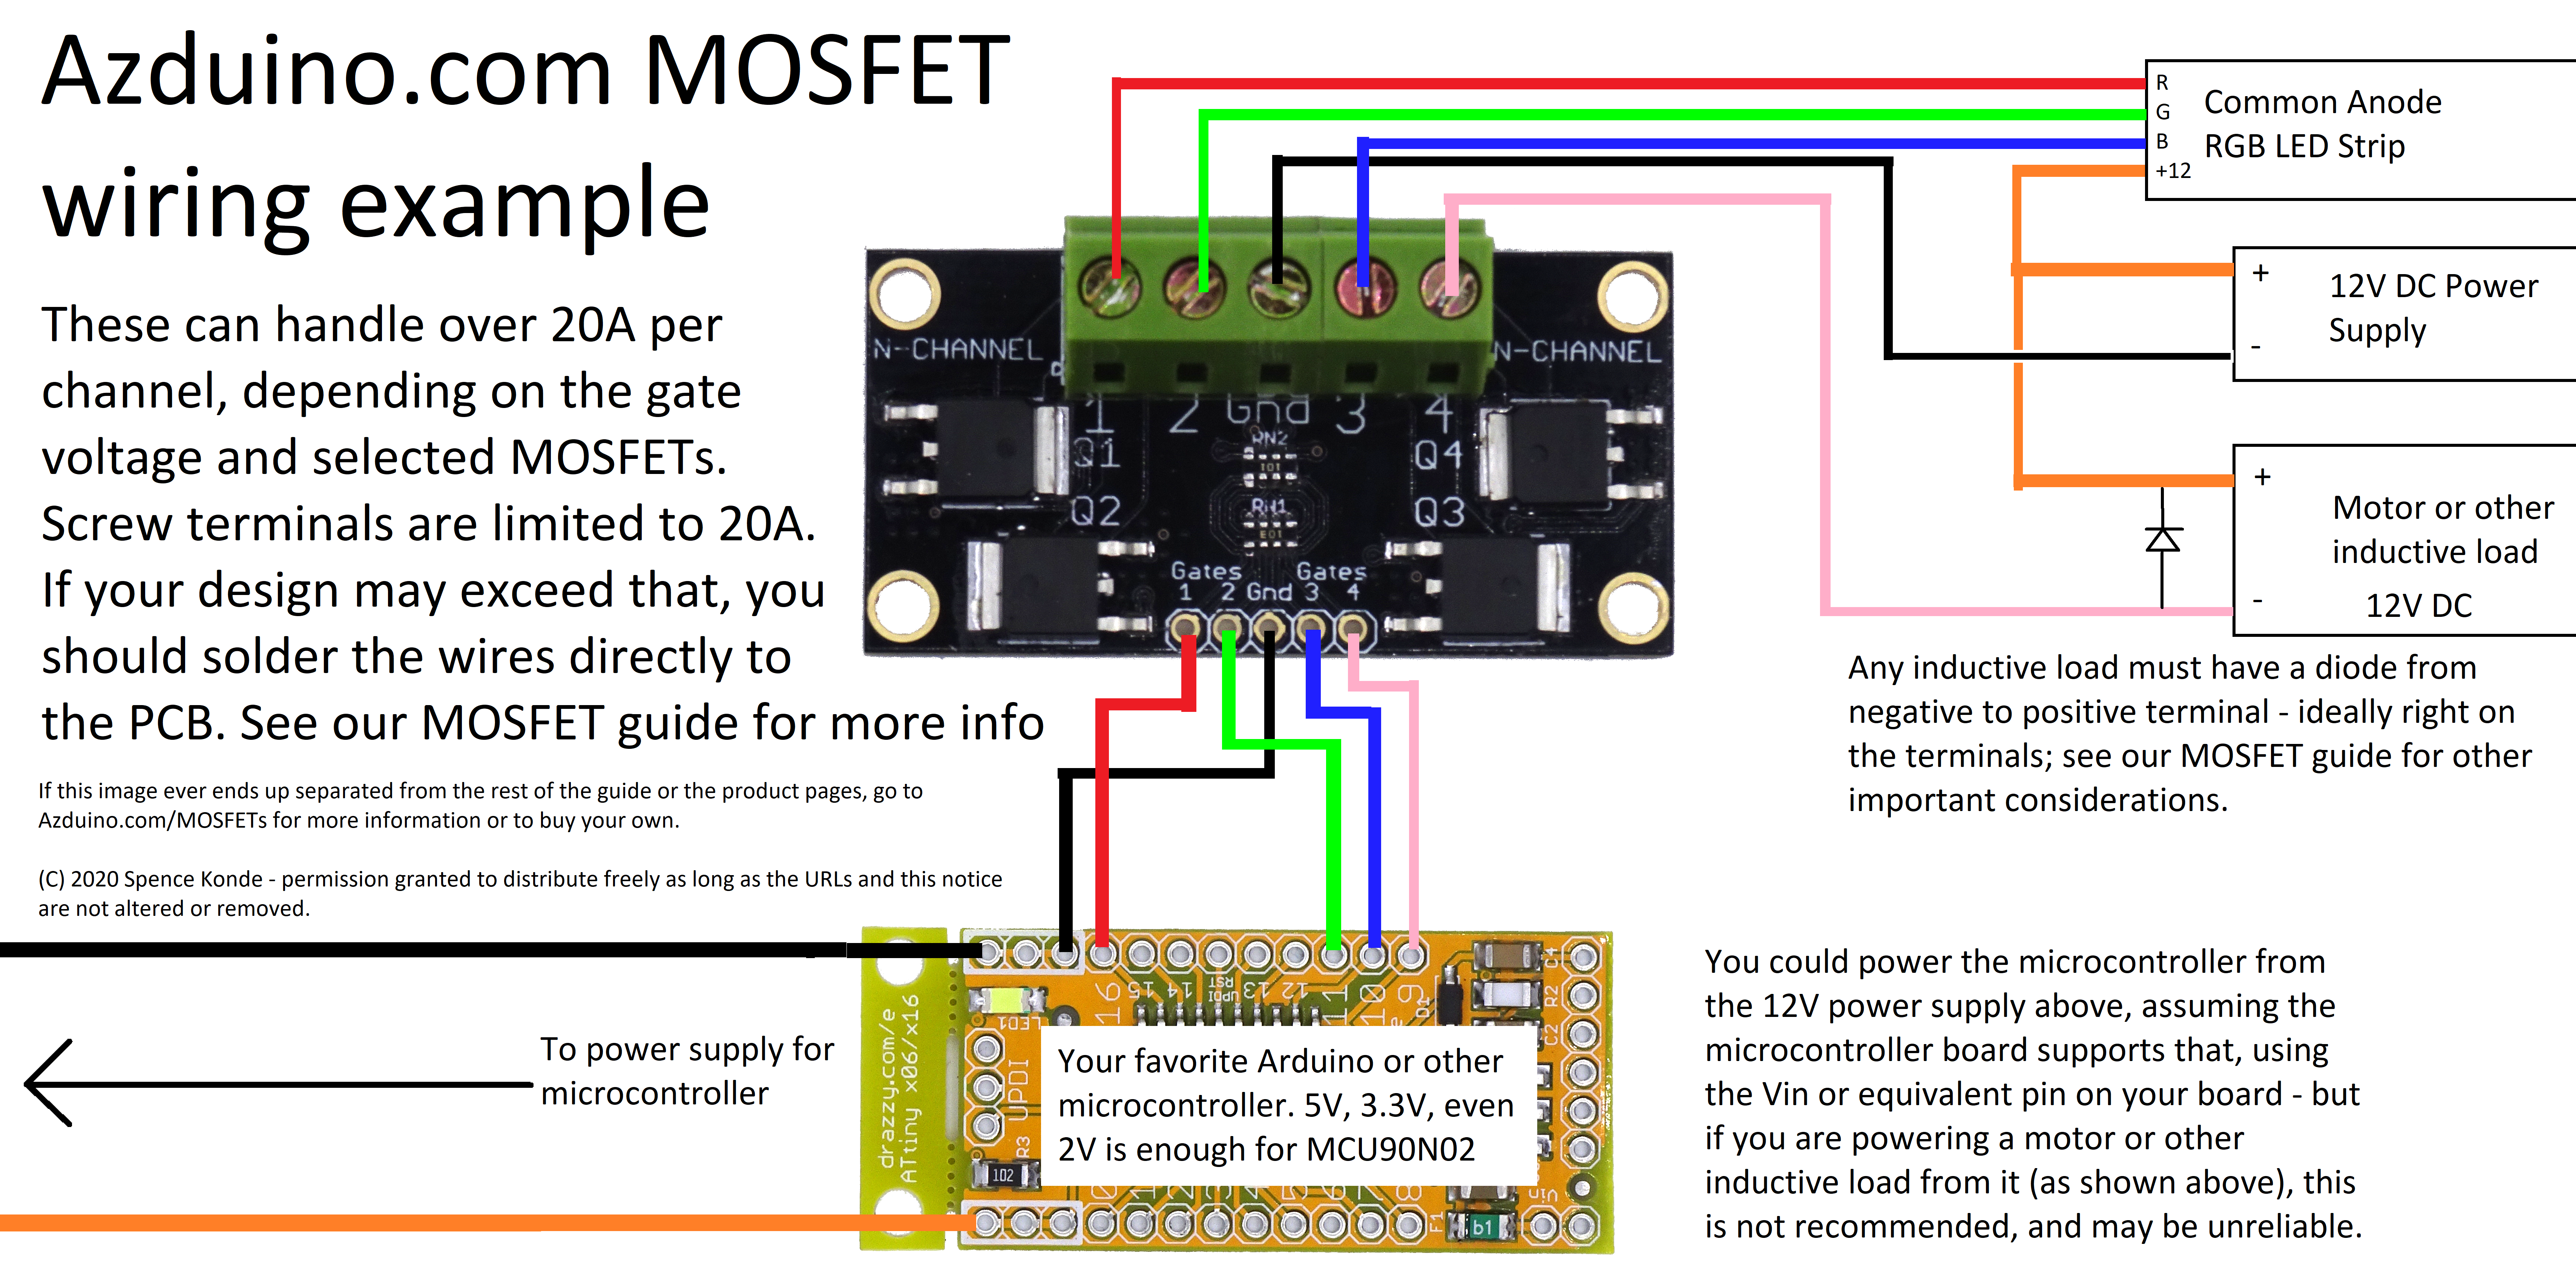 Basic wiring with 4-channel MOSFET, N-channel MOSFETs, and low-side switching